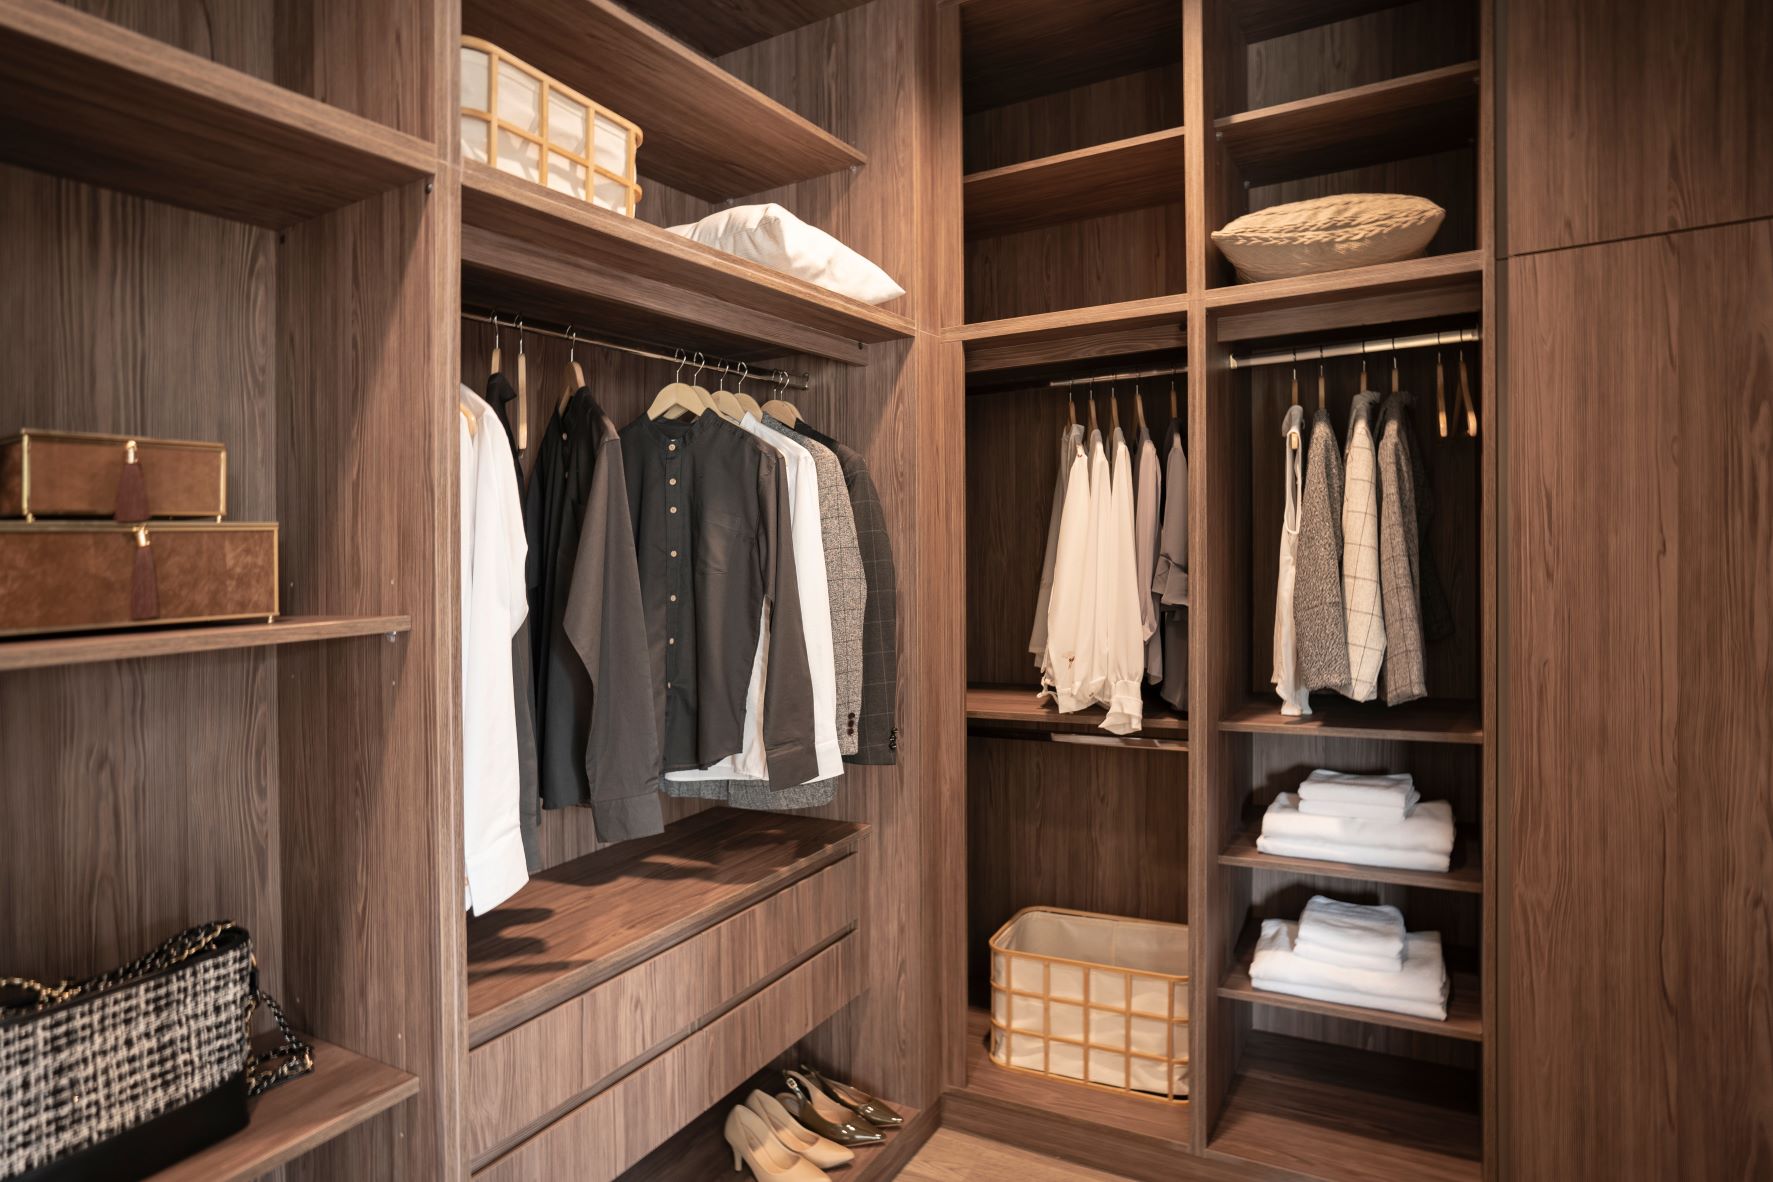 Tips on Choosing the Right Colors for Your Luxury Custom Closet